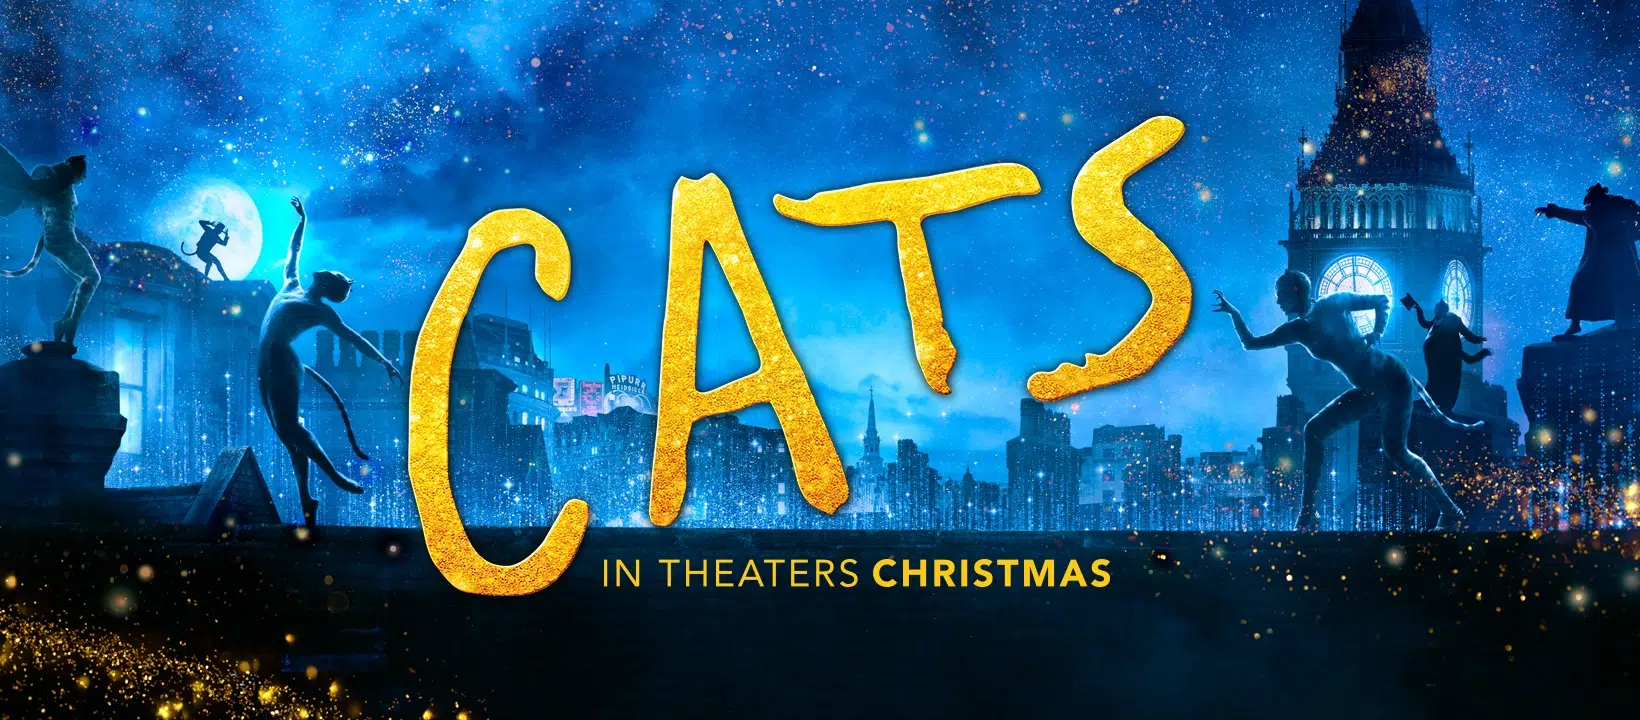 "Cats" Trailer #2